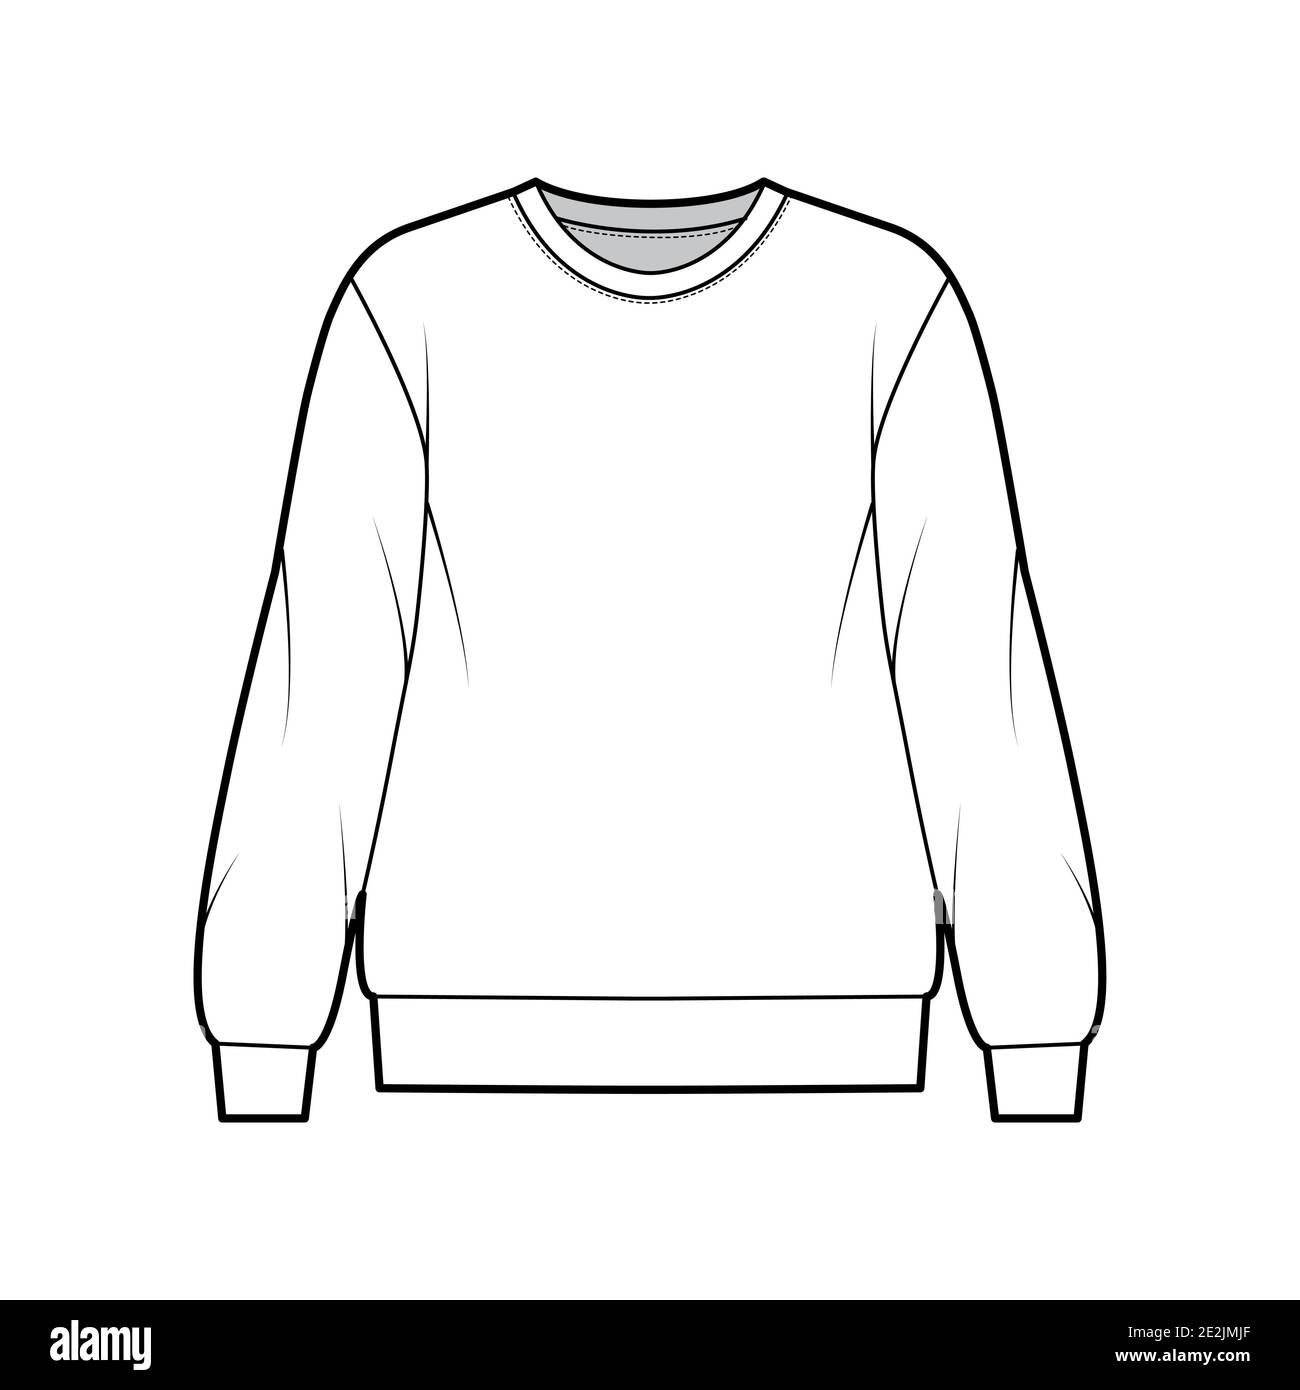 Cotton-terry oversized sweatshirt technical fashion illustration with relaxed fit, crew neckline, long sleeves. Flat outwear jumper apparel template front, white color. Women, men, unisex top CAD Stock Vector